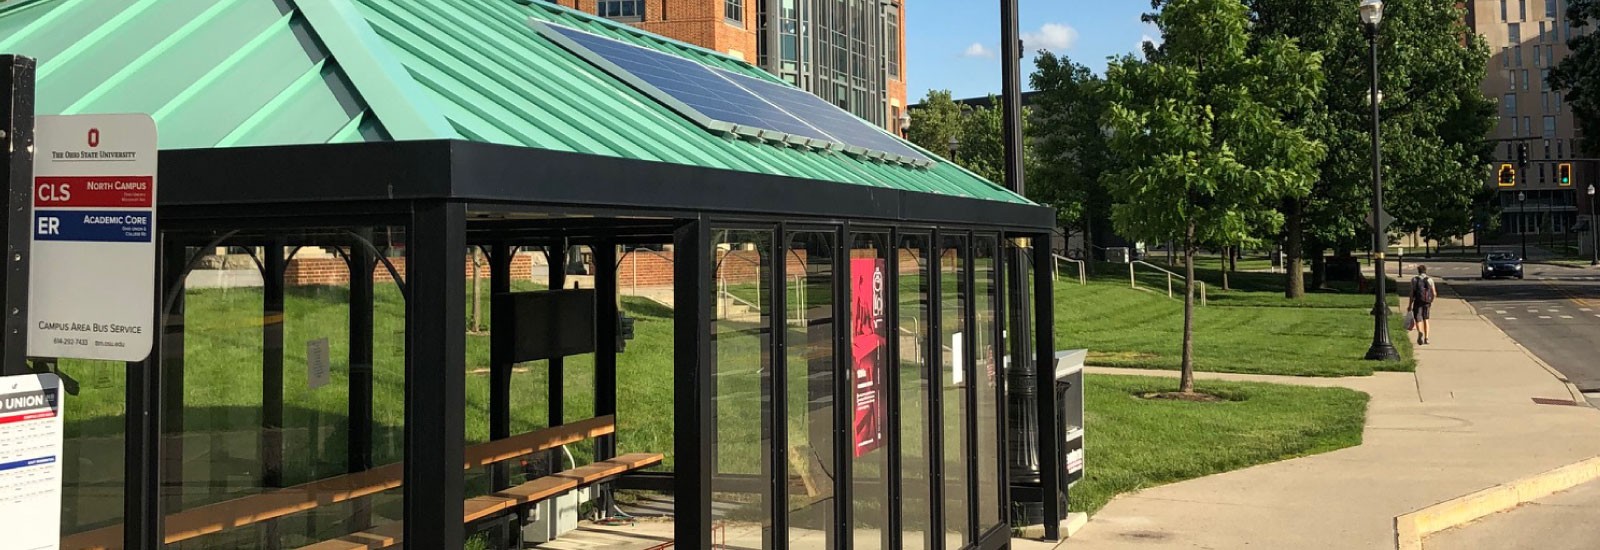 Solar panels on top of the bus stop at the Union on the Ohio State campus. 